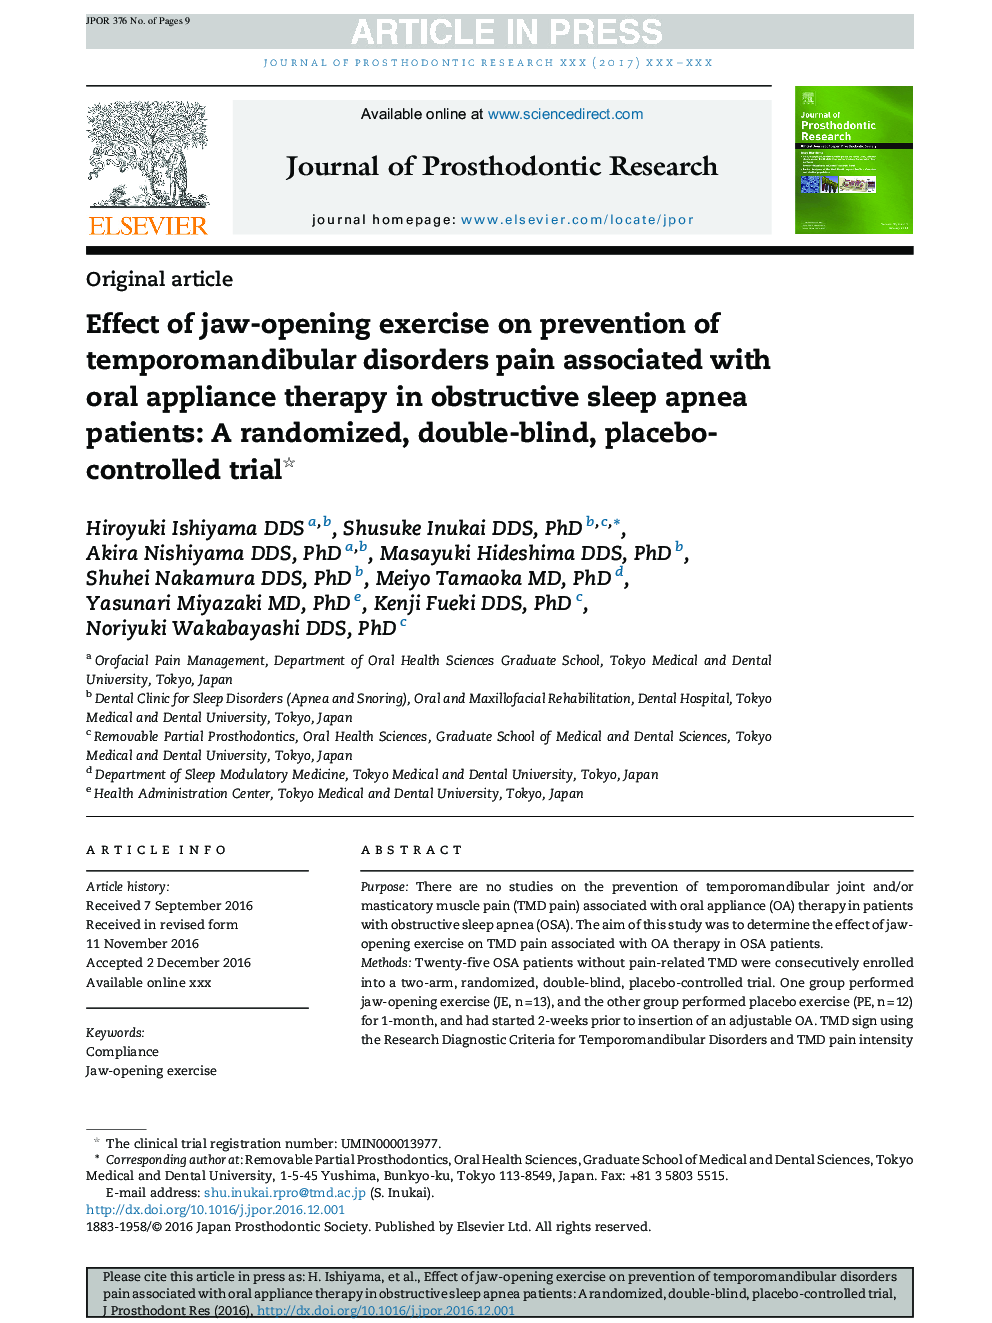 Effect of jaw-opening exercise on prevention of temporomandibular disorders pain associated with oral appliance therapy in obstructive sleep apnea patients: A randomized, double-blind, placebo-controlled trial